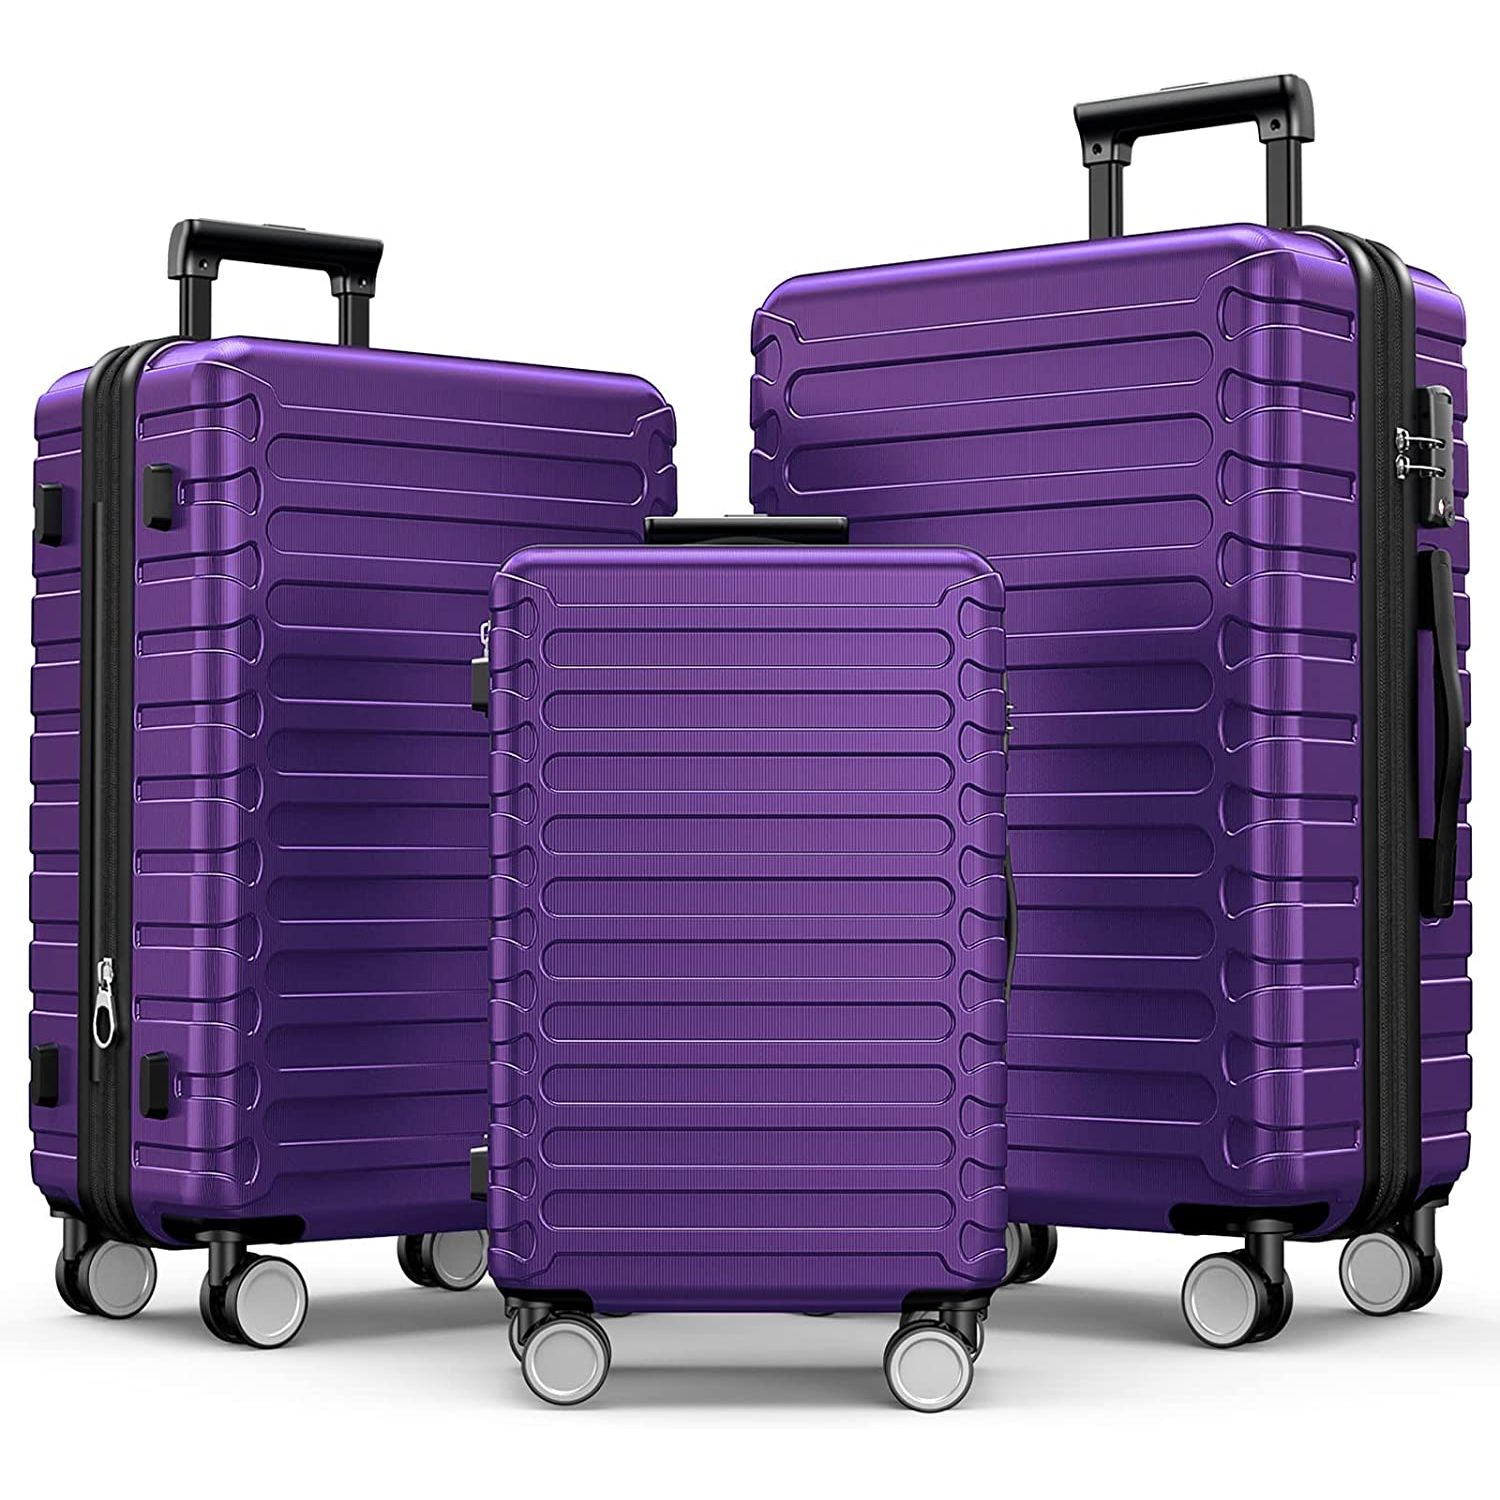 Luggage Sets Expandable ABS Hardshell 3pcs Clearance Luggage Hardside Lightweight Durable Suitcase sets Spinner Wheels Suitcase with TSA Lock-Suitcase clearance